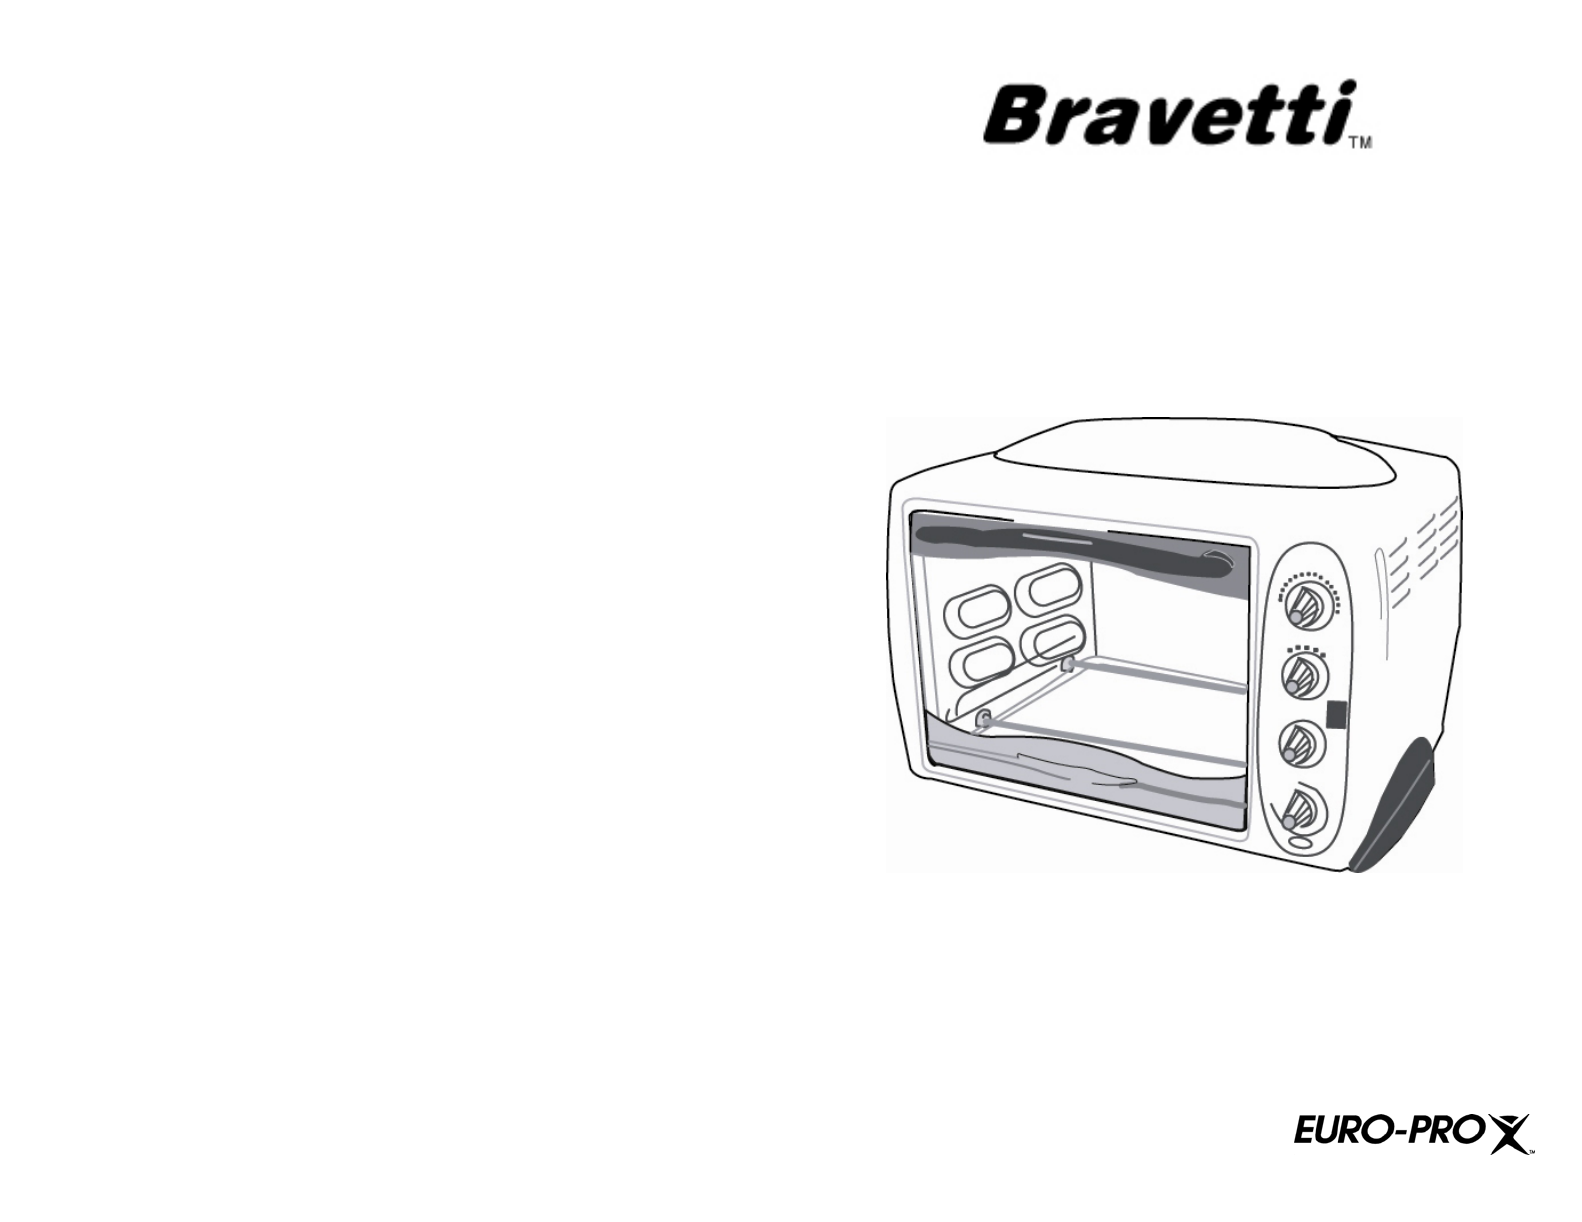 Bravetti Toaster Oven Manual | All About Image HD